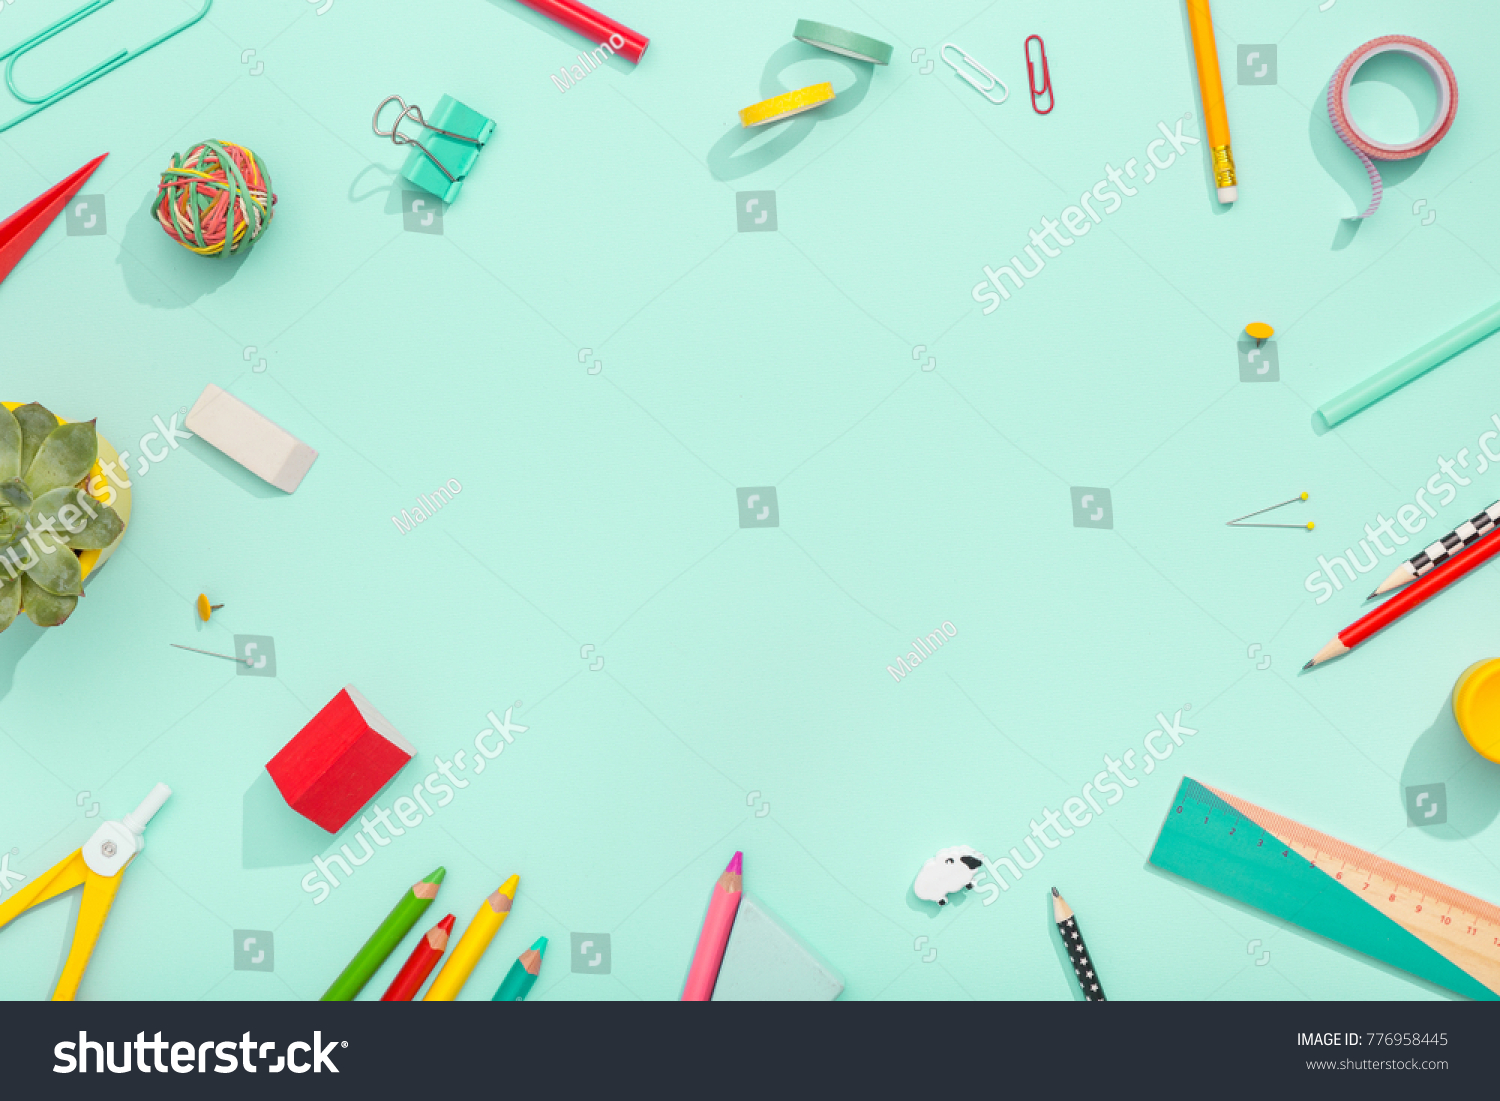 notebook, note, pen, paper clip, on pastel green background. Office desk with copy space. Flat lay. #776958445